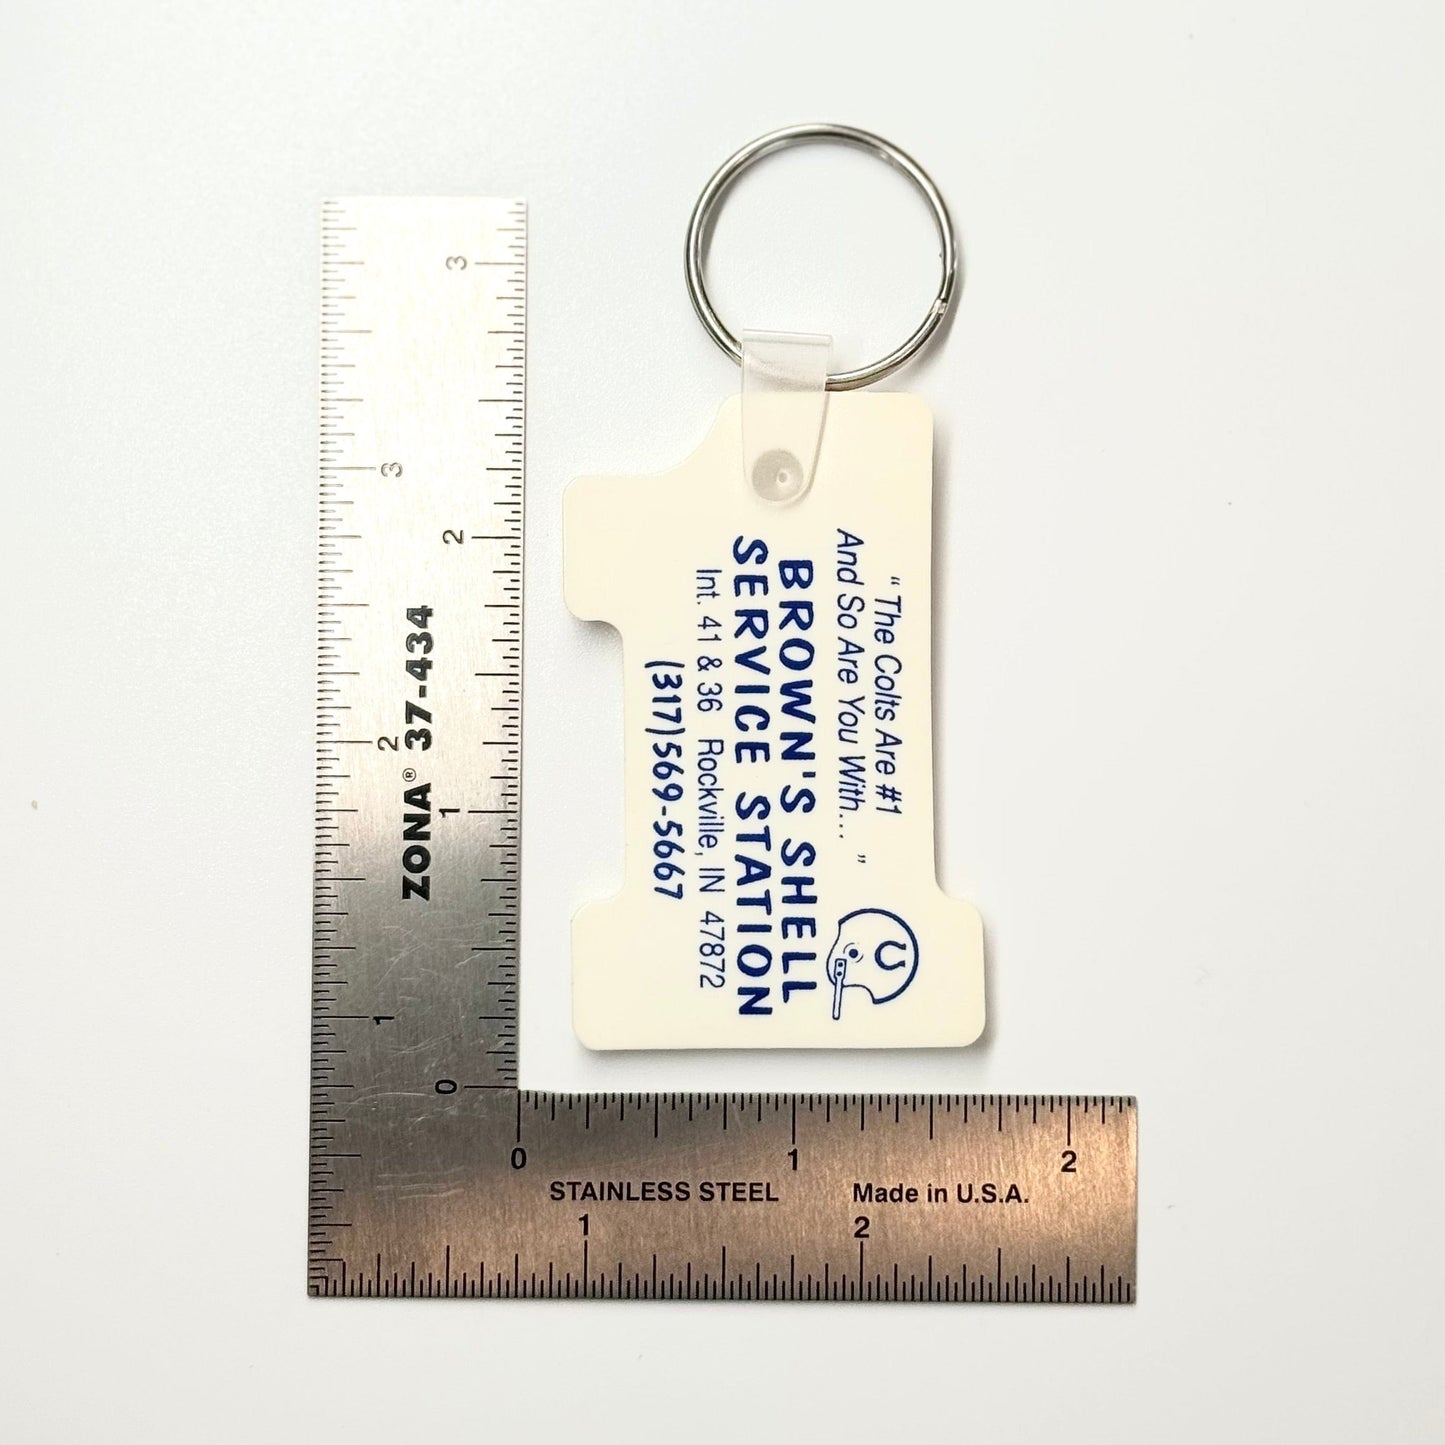 Rockville, IN ‘Brown’s Shell Station/Colts 1991 Schedule’ Keychain Key Ring White Rubber #1